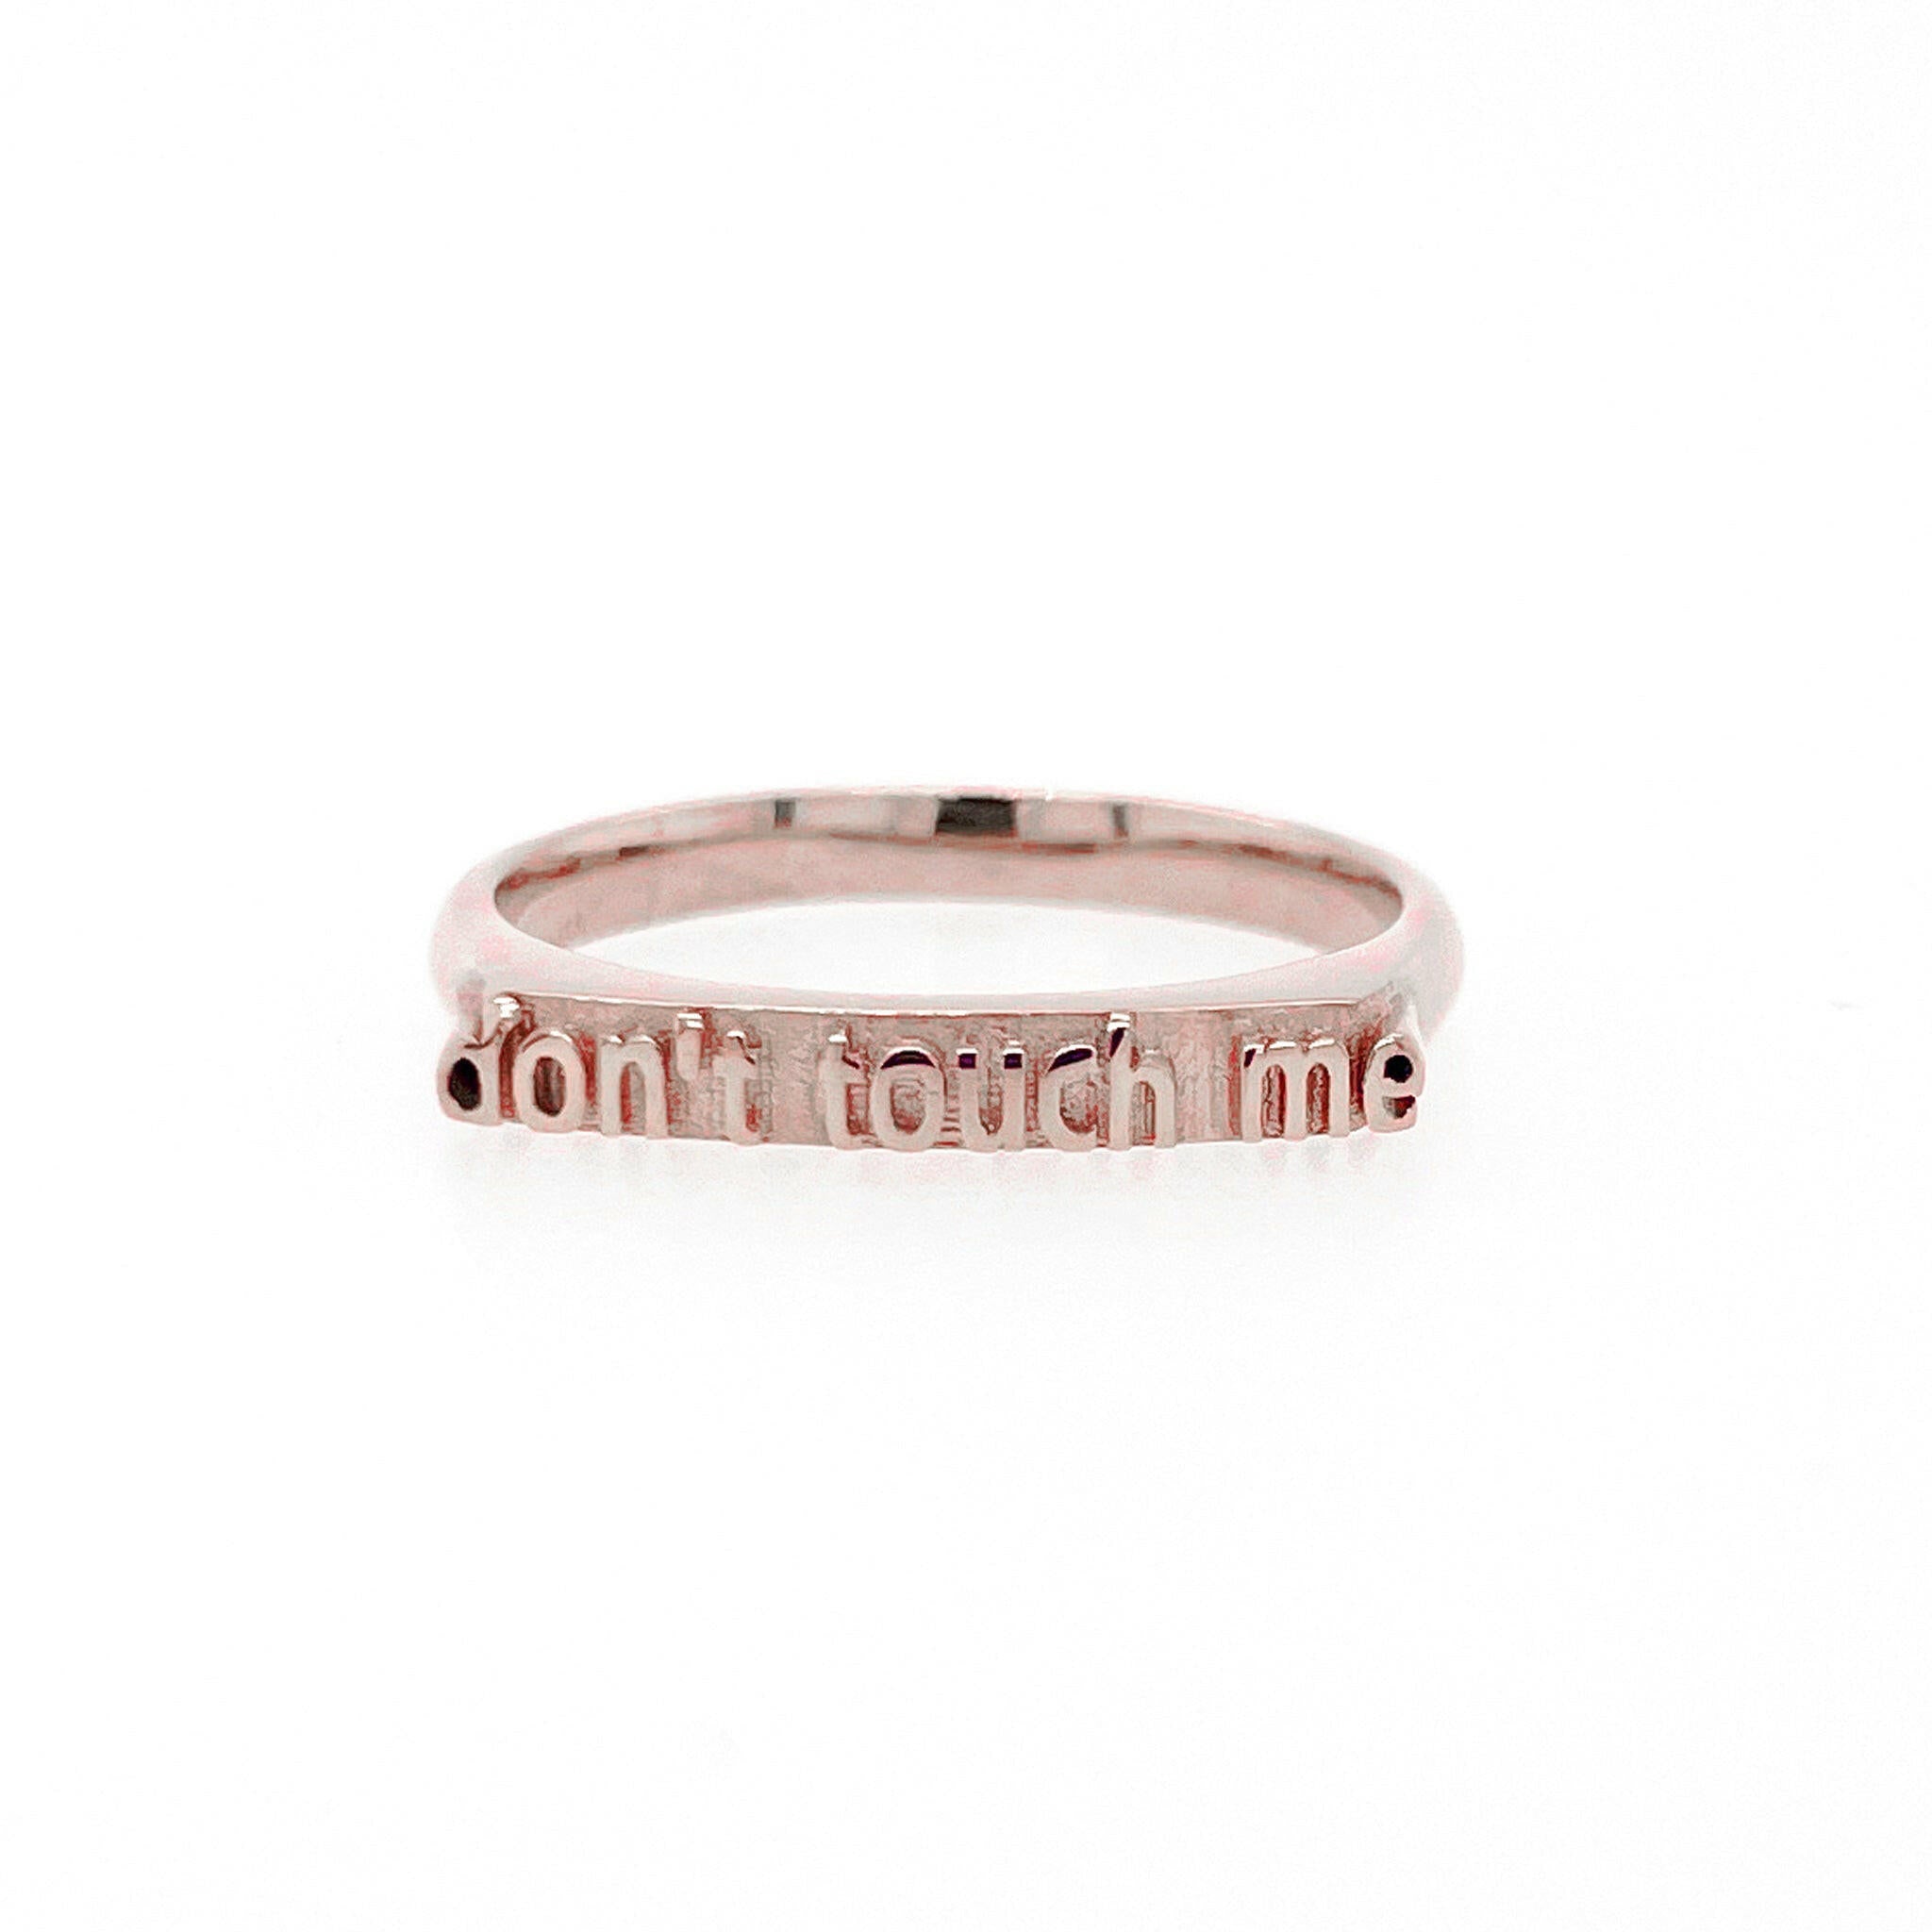 front view of 14 karat rose gold ring with text that reads "don't touch me"